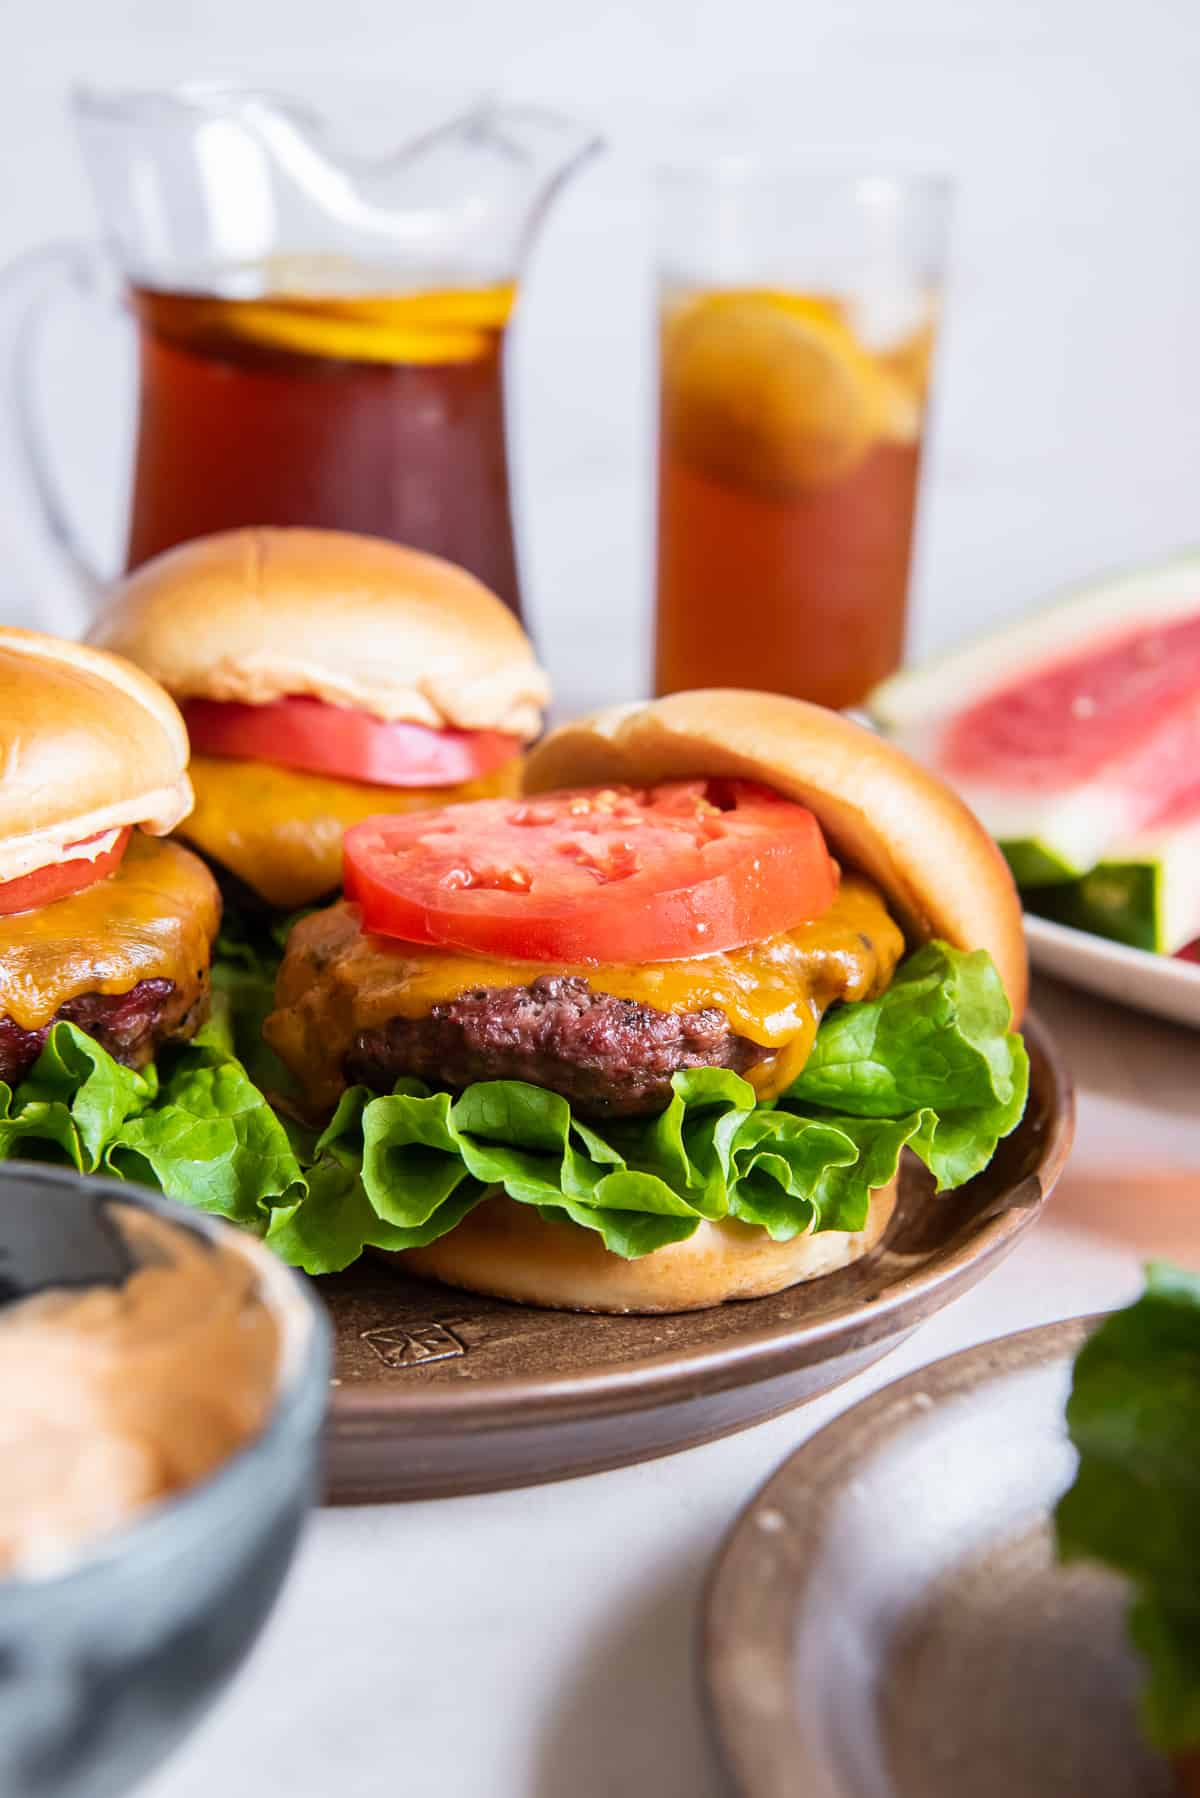 A burger  with lettuce and tomato in front of a pitcher of iced tea.